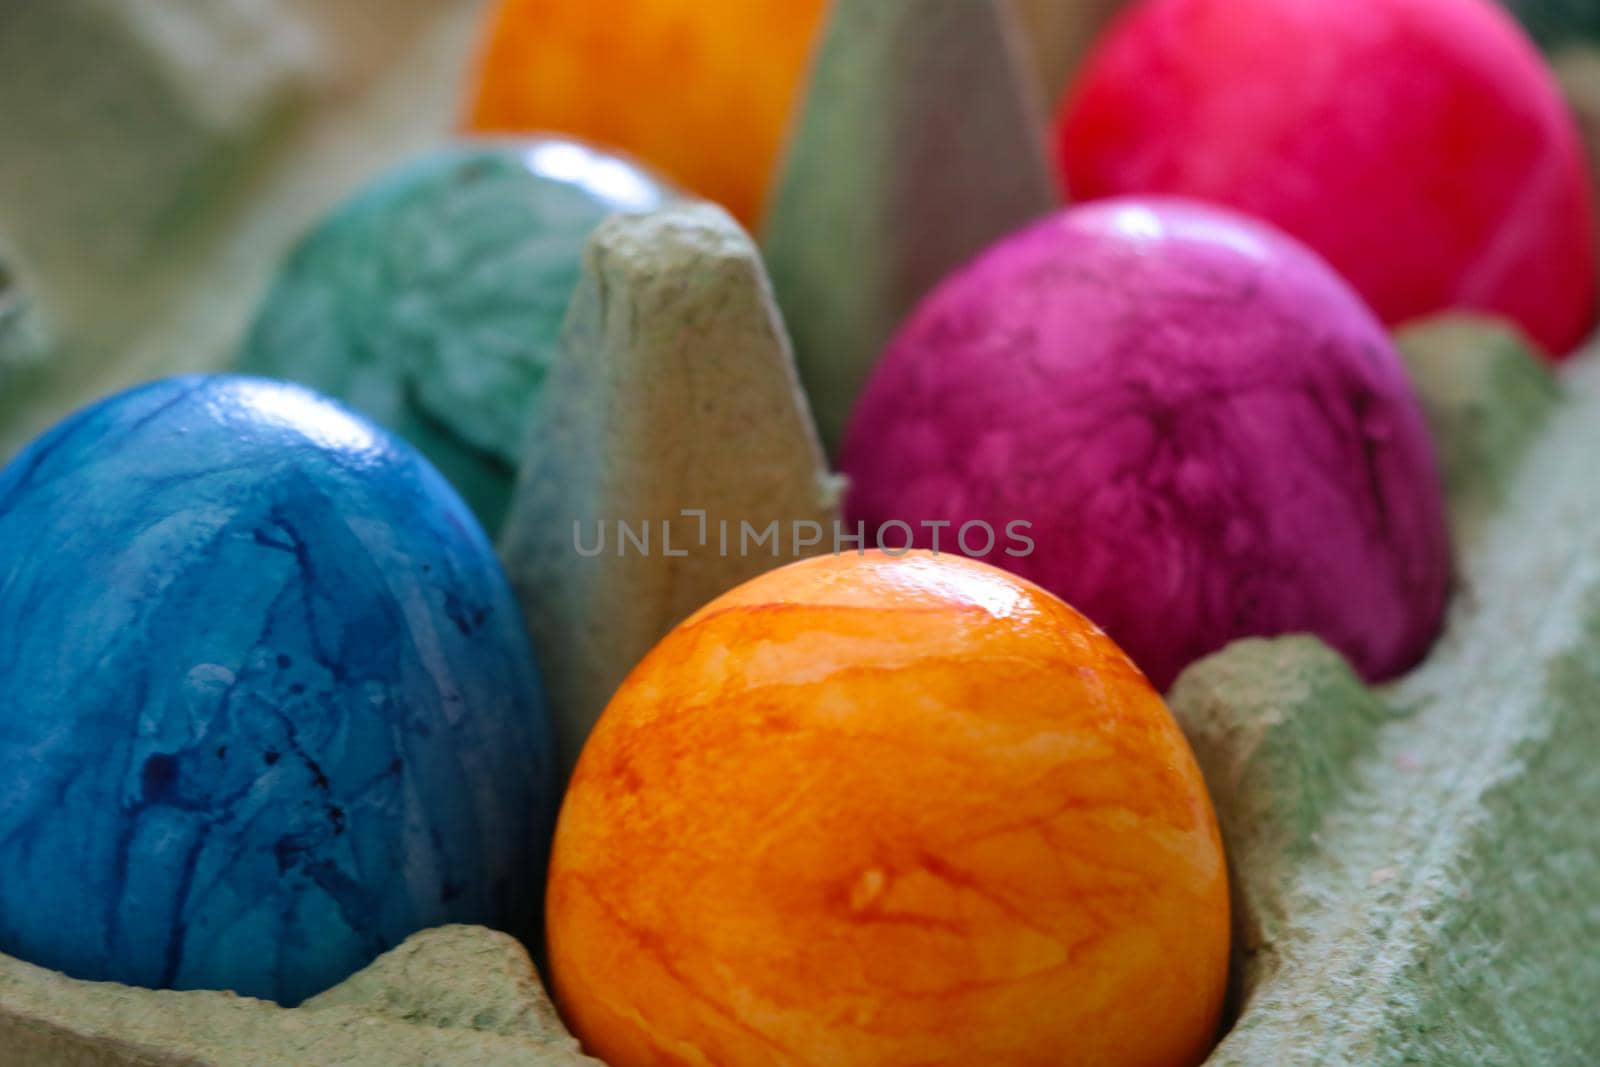 Blurred background. Out of focus. Multi-colored eggs in a package. Out of focus, blurred.